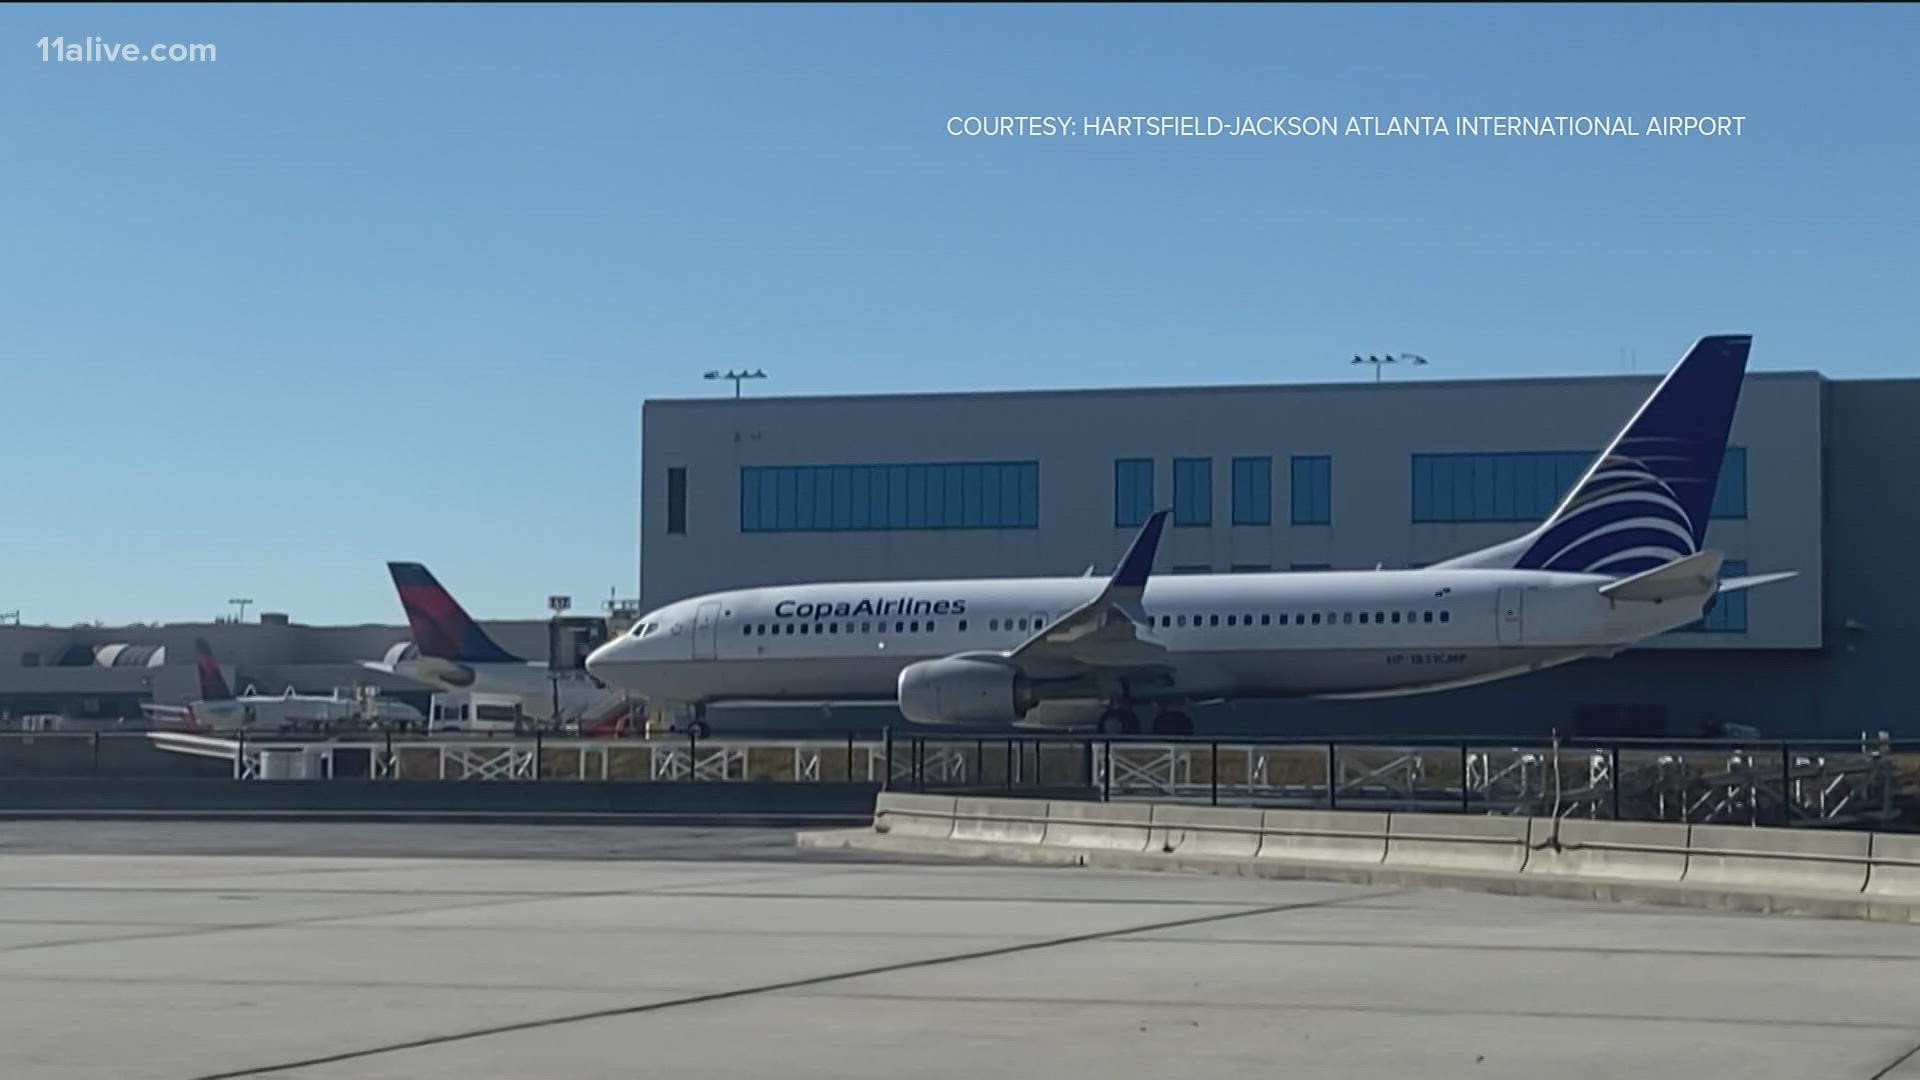 Atlanta's Hartsfield-Jackson International Airport announced a new partnership with Copa Airlines Tuesday.